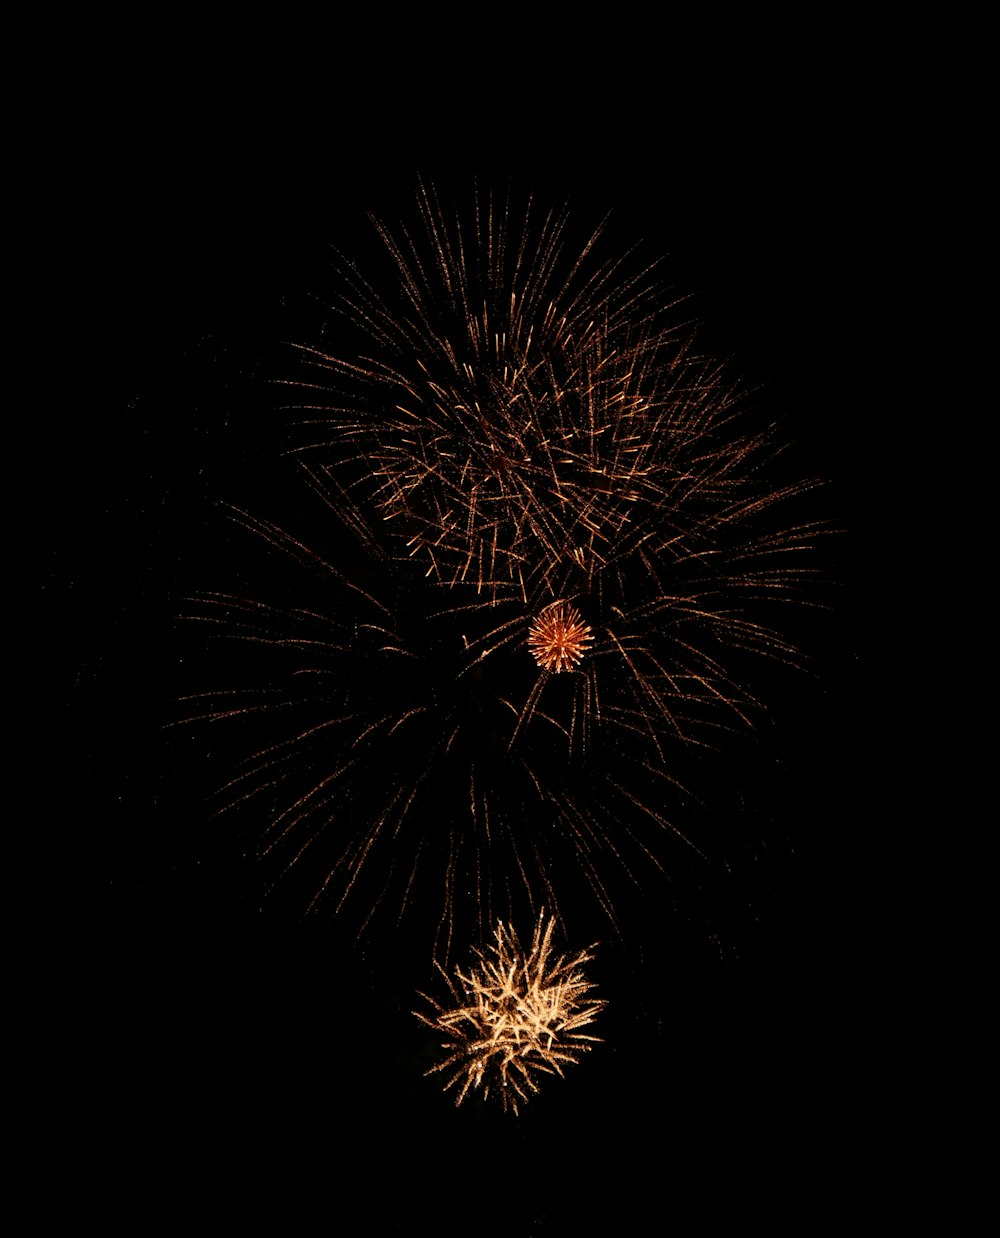 a firework is lit up in the dark sky